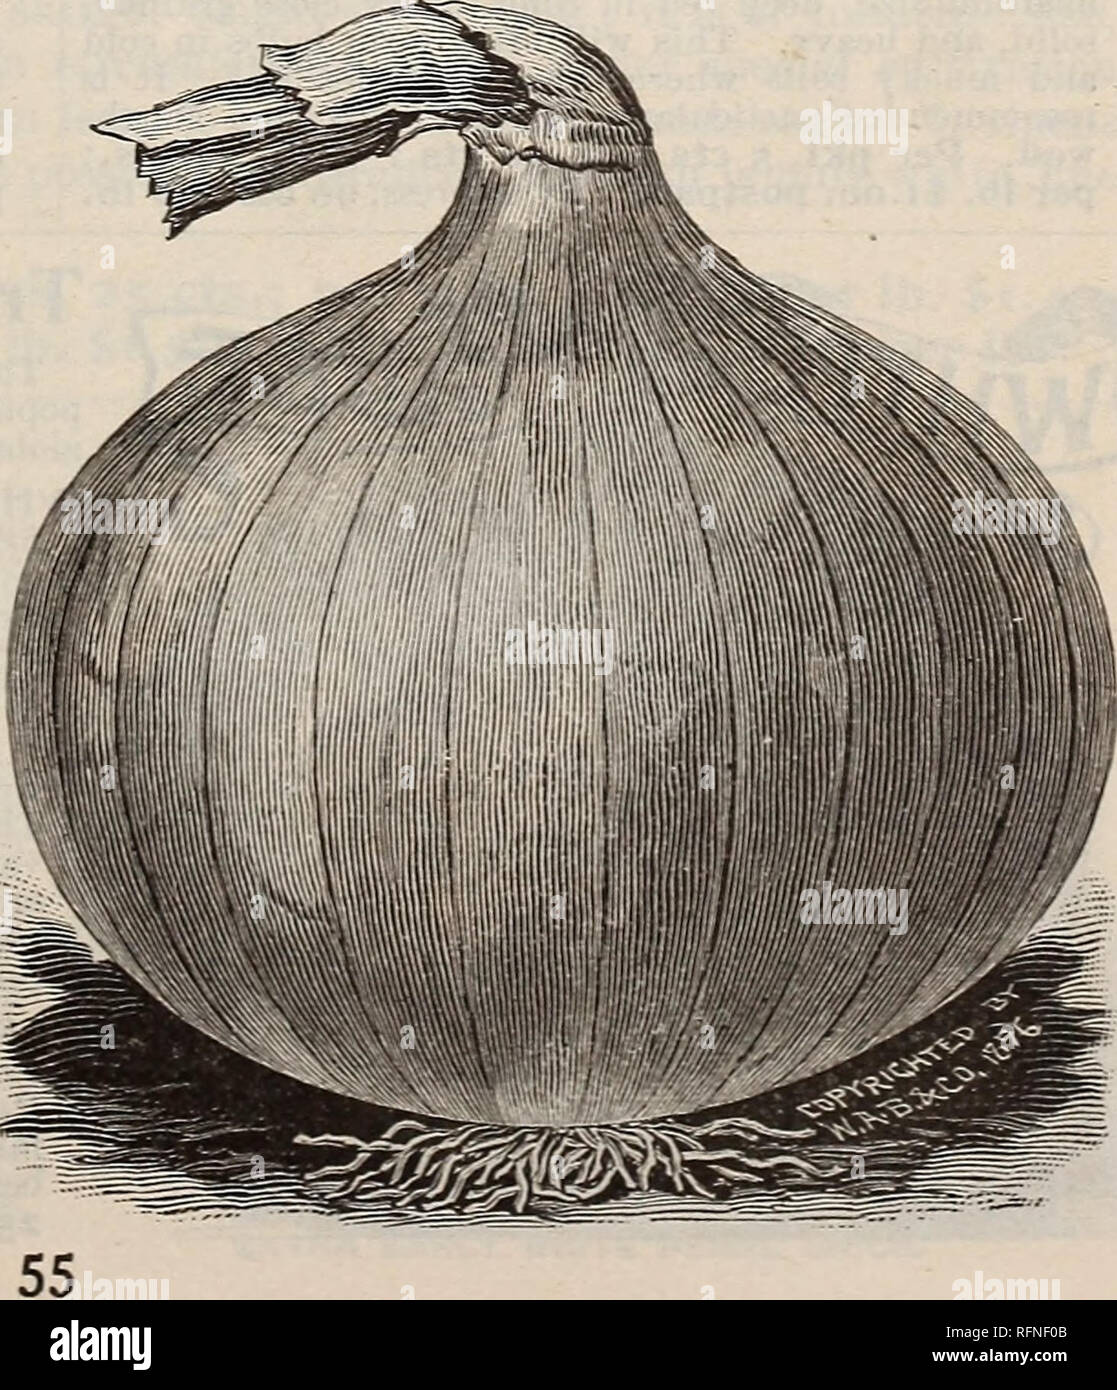 . Burpee's farm annual written at Fordhook Farm. Nurseries (Horticulture) Pennsylvania Philadelphia Catalogs; Vegetables Seeds Catalogs; Plants, Ornamental Catalogs; Flowers Seeds Catalogs. GOOD ONION SEED is of the utmost importance. Fully realizing this, we make a Specialty of the BEST Onion Seed. We have all our crops raised under special contract, subject to careful supervision. Our Ouion Seed is grown only from choice, selected bulbs, examined critically before being set out for seed. In quality it is vastly superior to much that is put upon the market, often grown by persons either too i Stock Photo